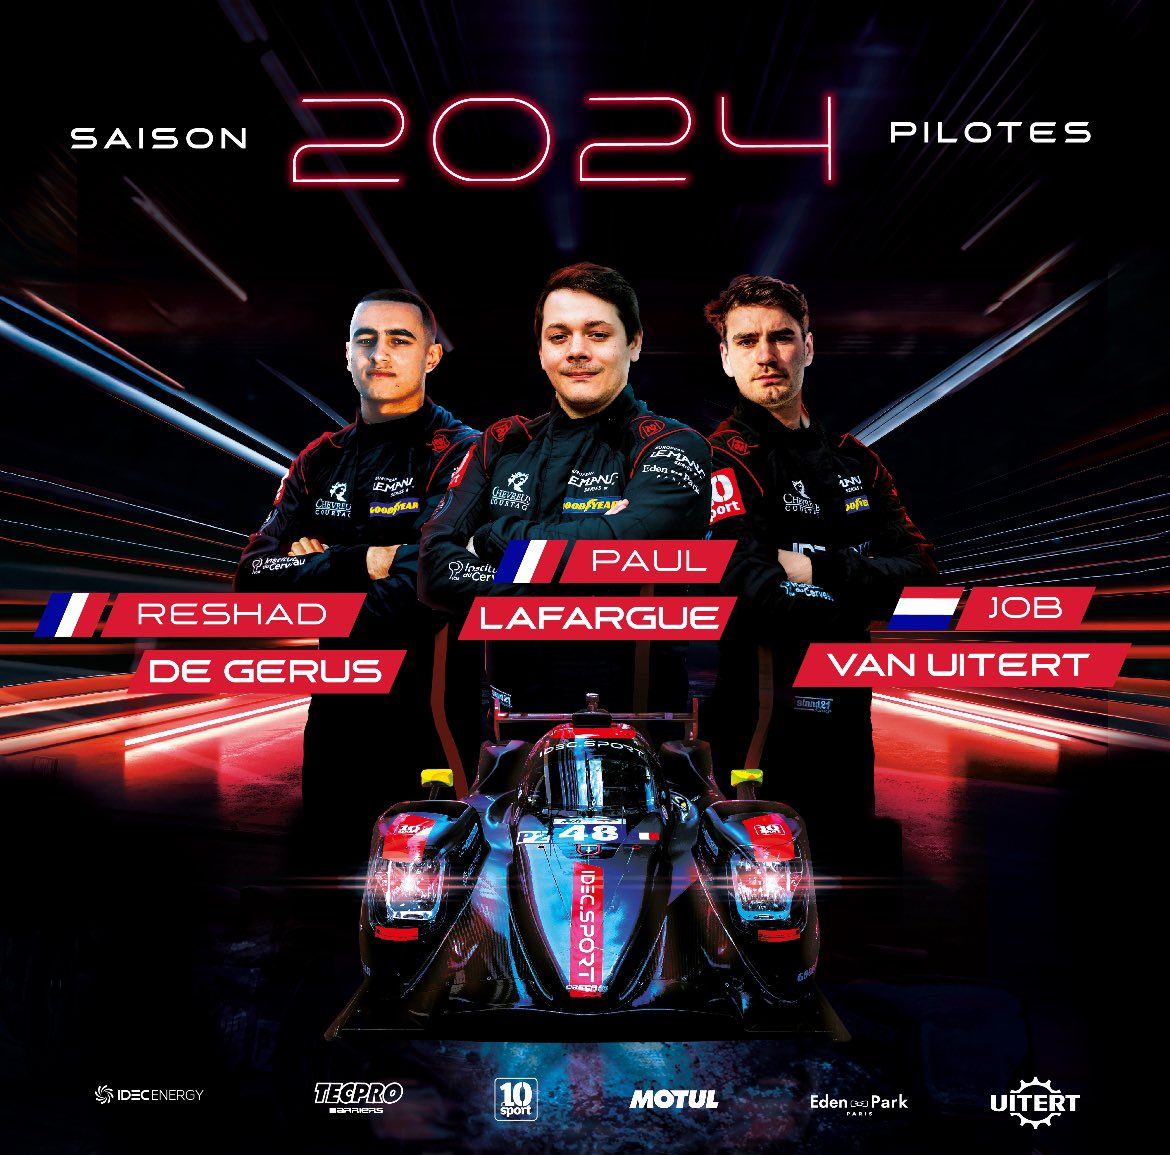 Our new LMP2 trio for 2024 🏆 IDEC SPORT is already in the starting blocks for the 2024 European Le Mans Series season in the LMP2 class. For this new season, Paul LAFARGUE will be supported by Frenchman Reshad DE GERUS and Dutchman Job VAN UITERT. #elms2024 #idecsportracing